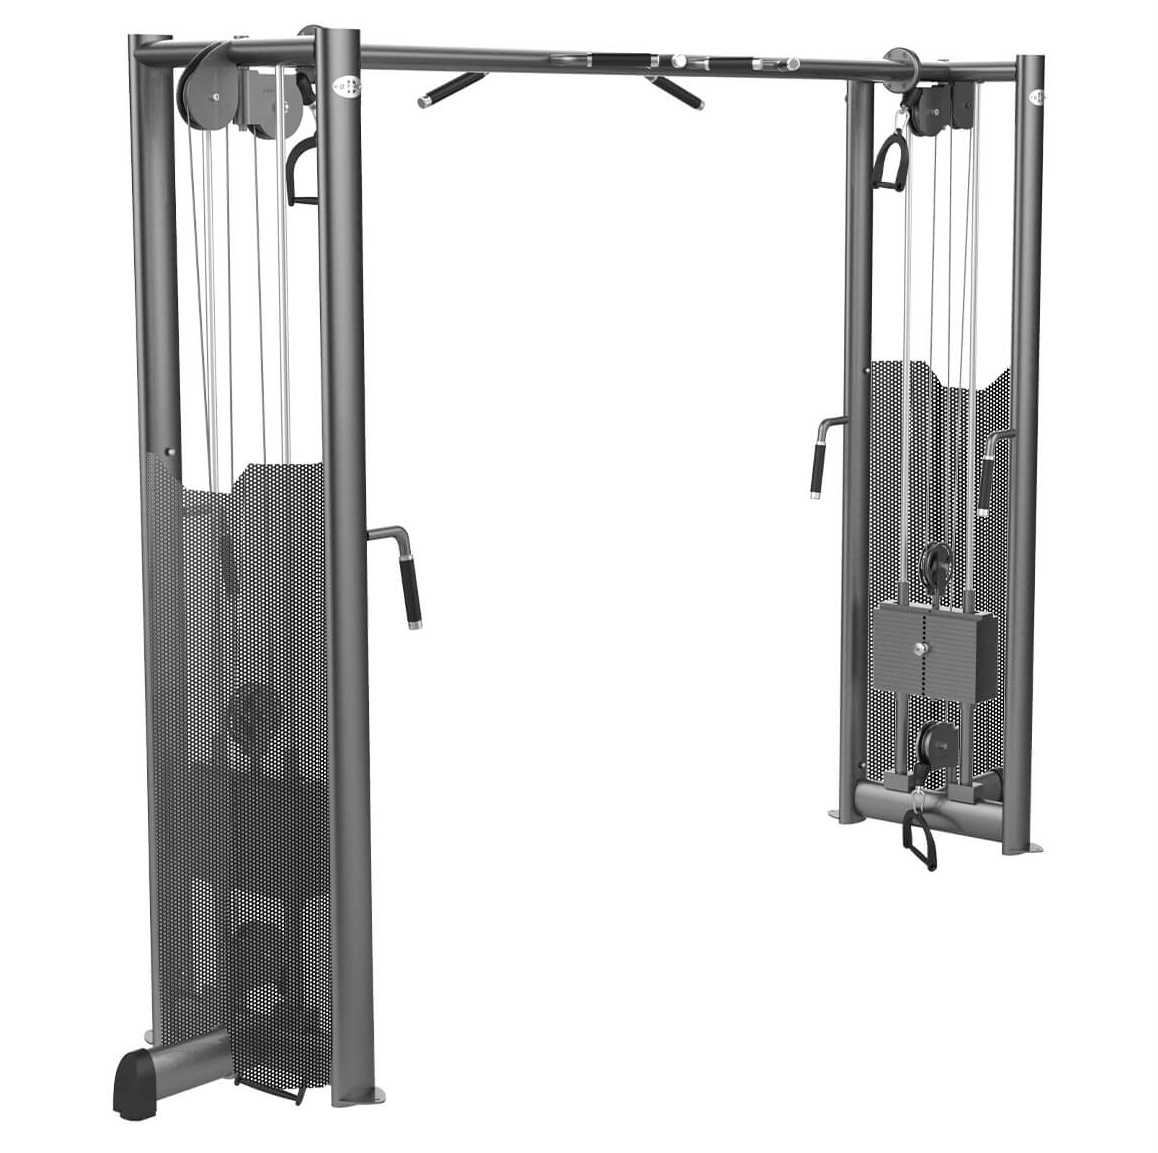 CABLE CROSSOVER STATION WITH CHIN-UP BAR GYM80-G4004 ウェイトスタック ：85kg x 2
寸法 : (W)3460×(D)760×(H)2280mm
重量 : 330kg
カラー : カスタマイズ可能